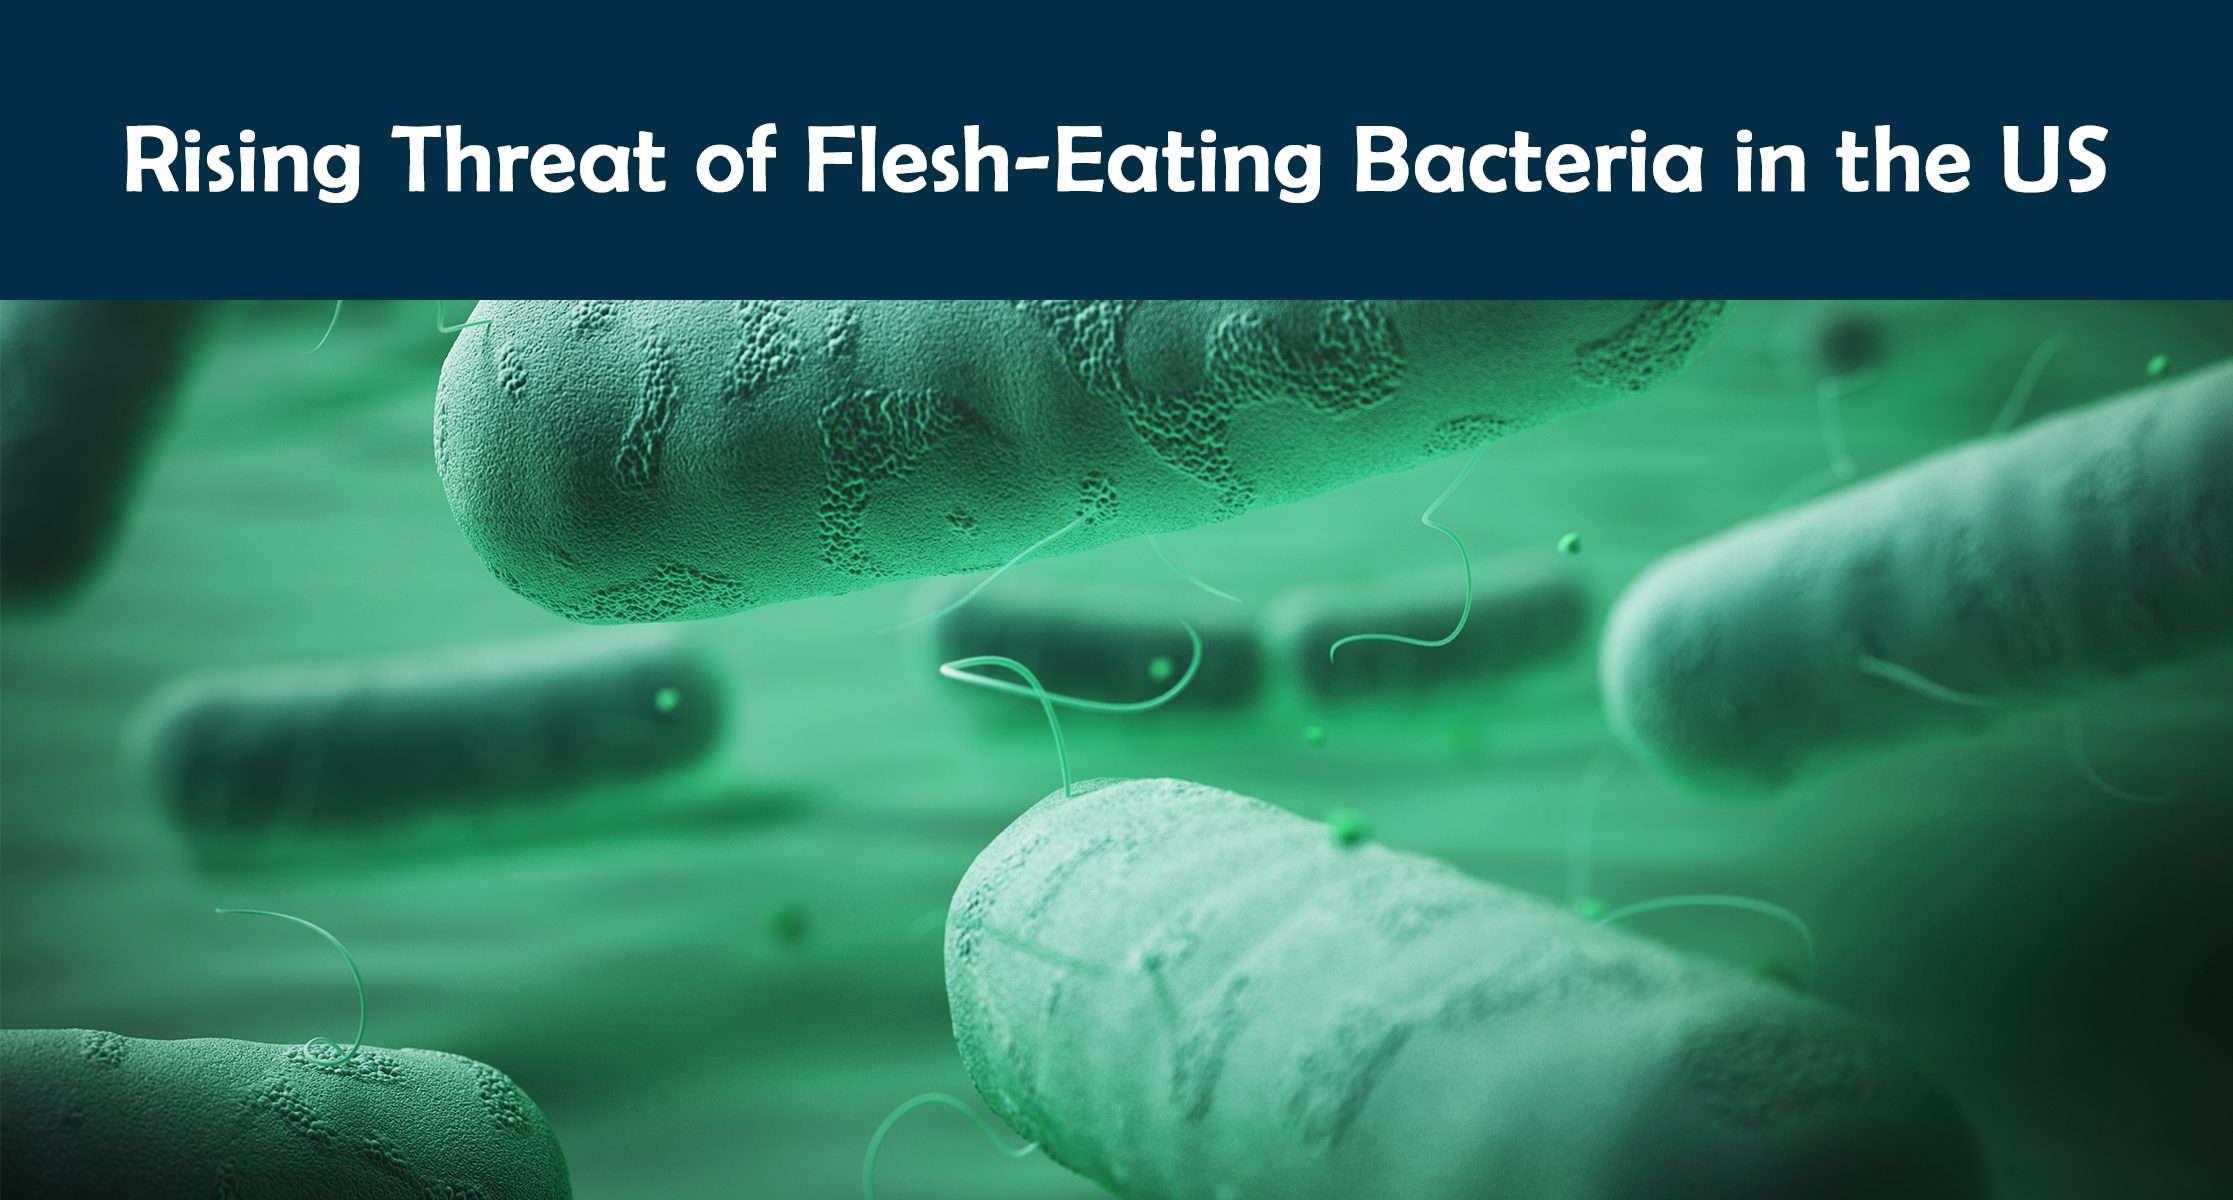 Rising Threat of Flesh-Eating Bacteria in the US